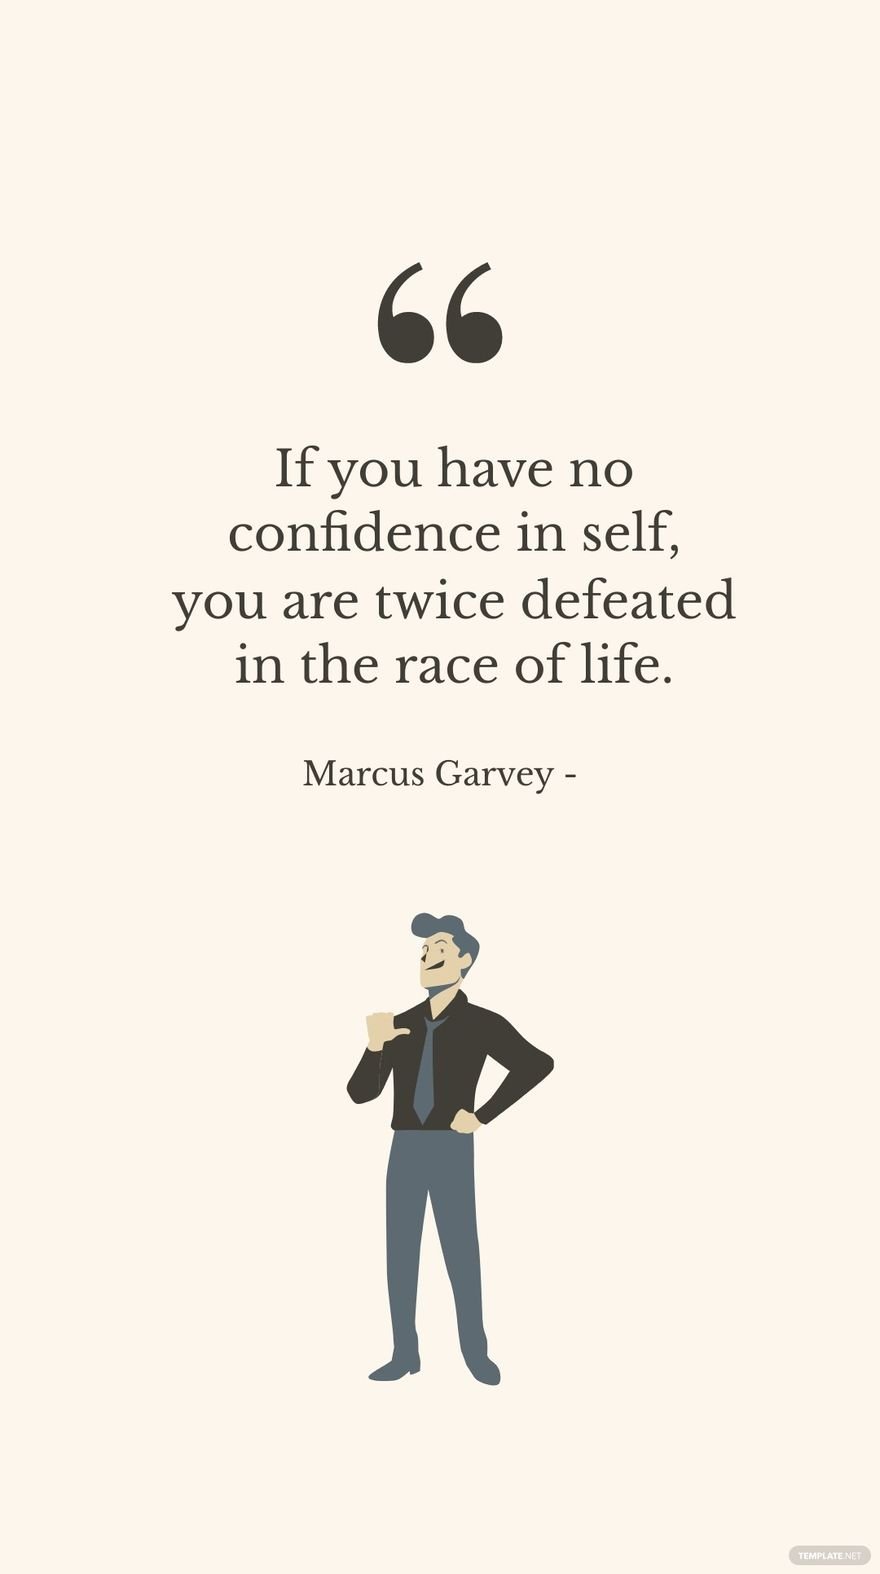 Marcus Garvey - If you have no confidence in self, you are twice defeated in the race of life. in JPG